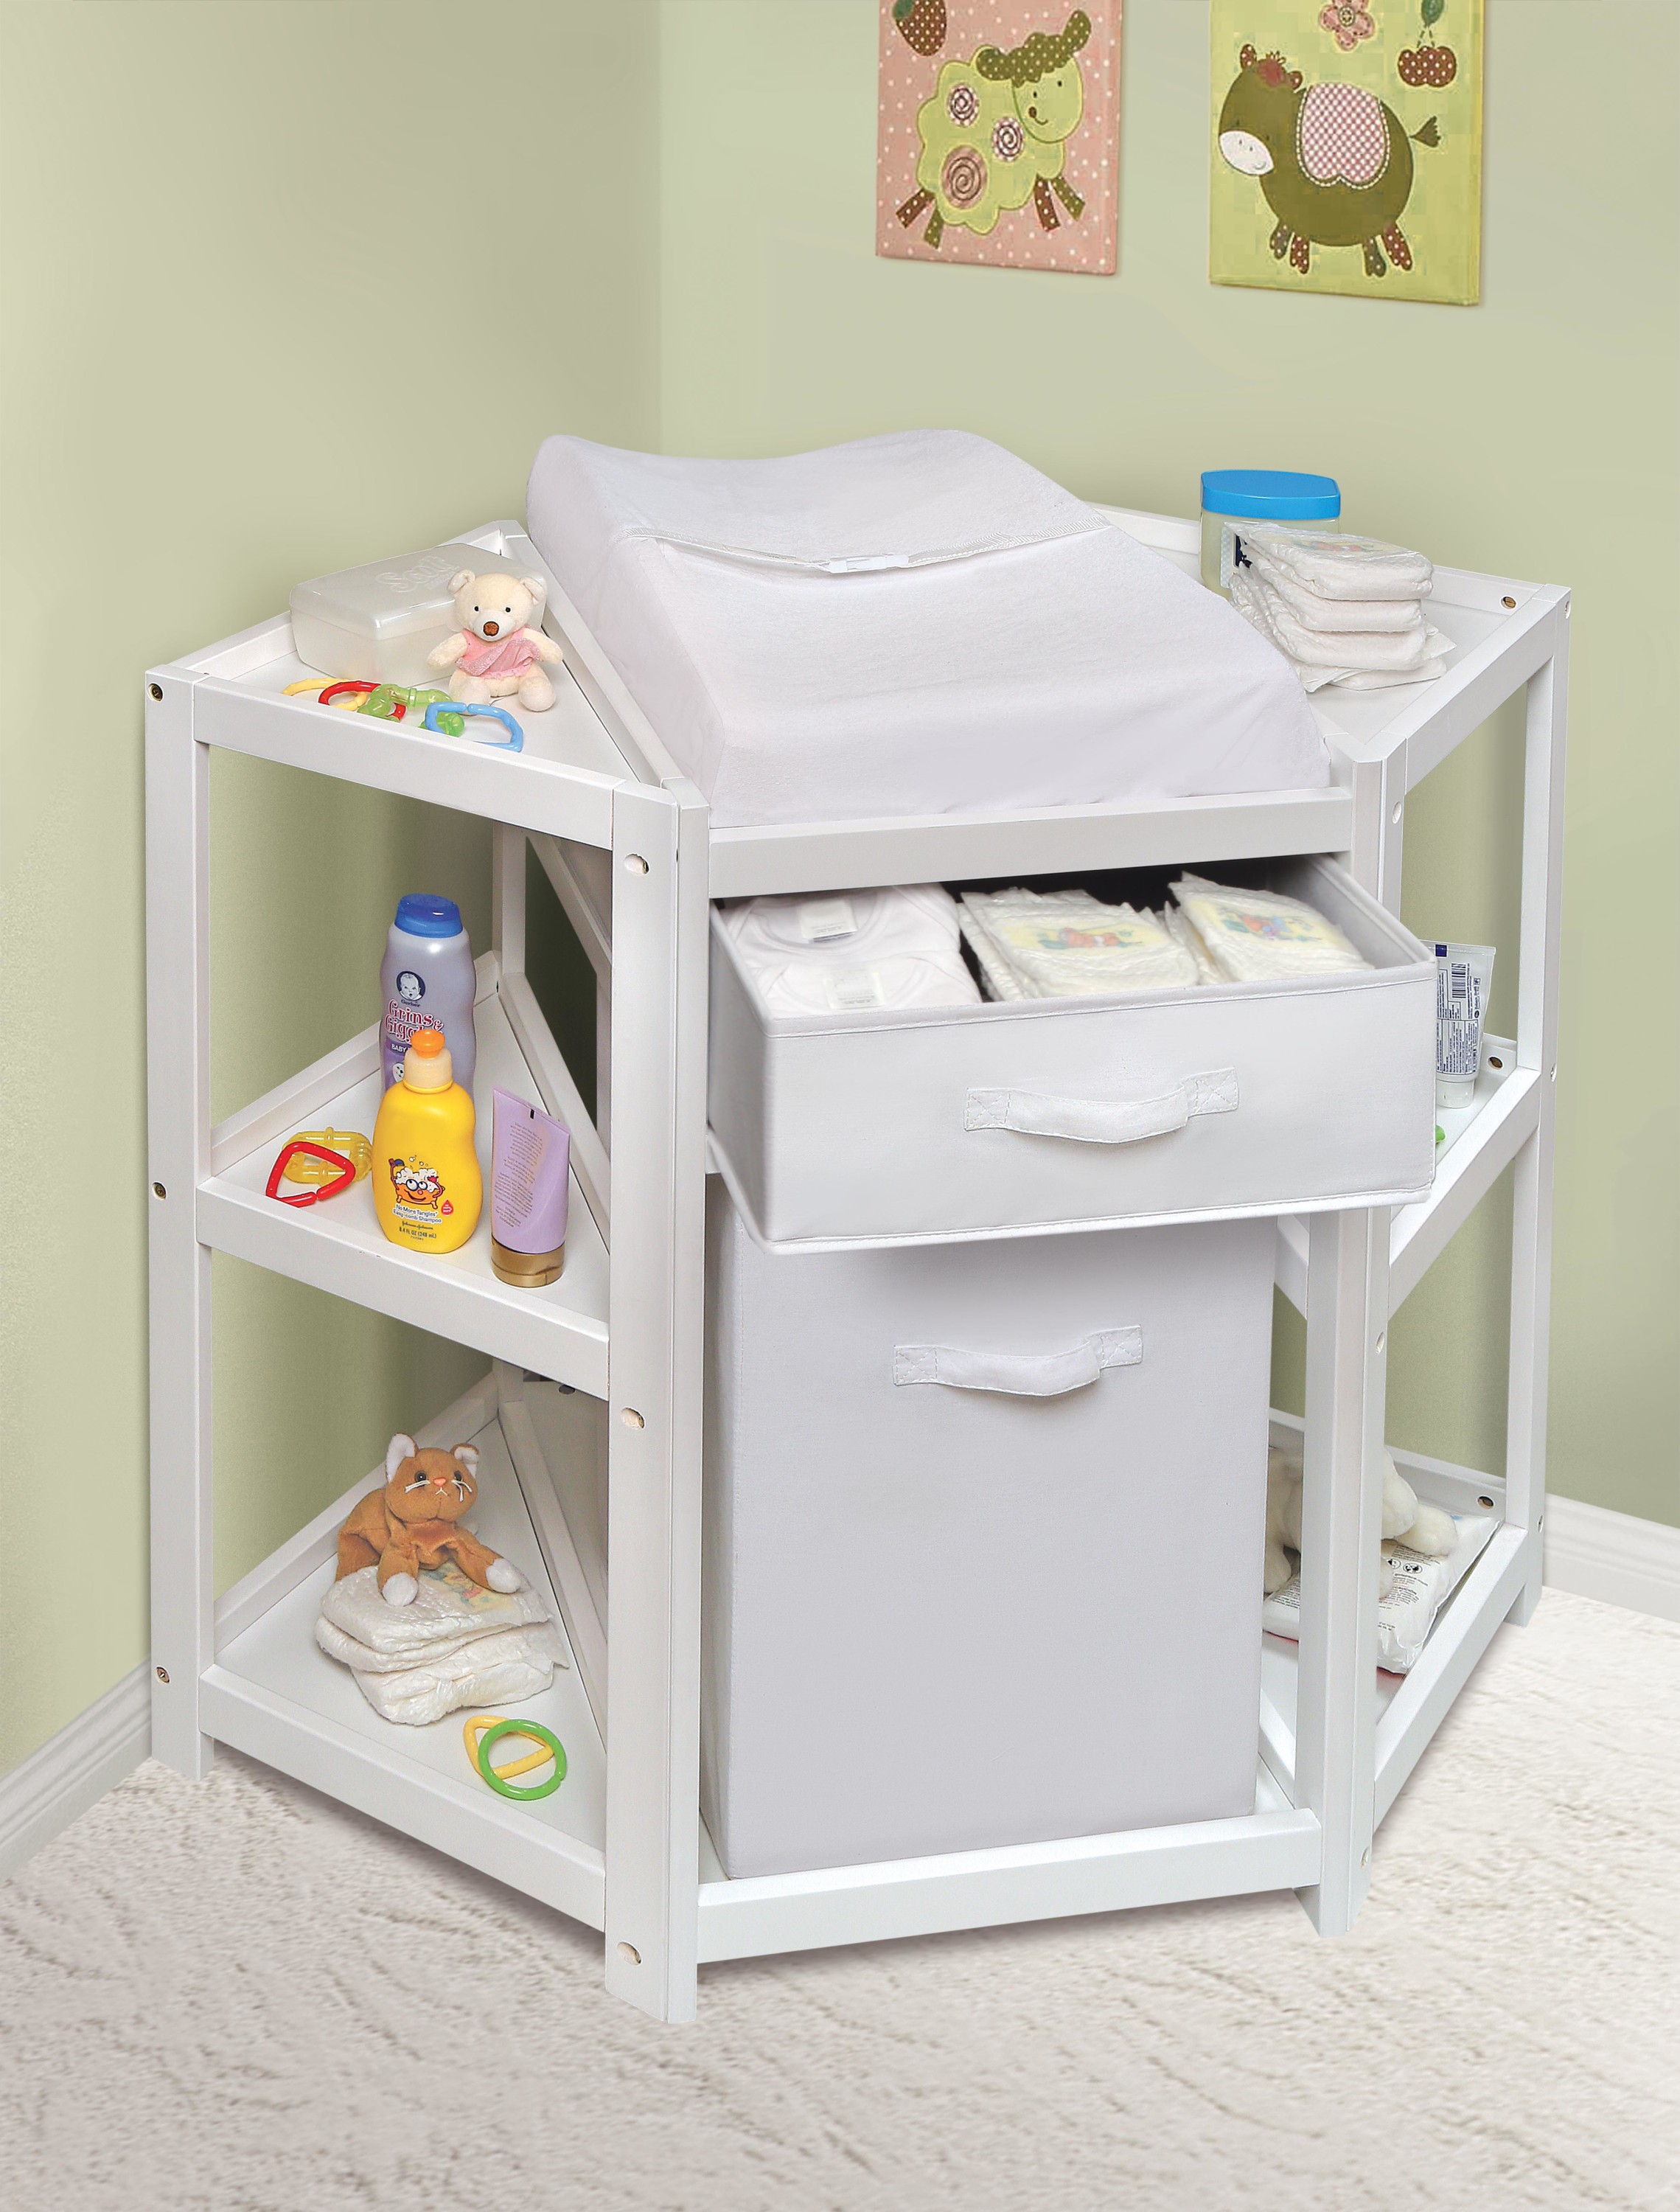 Badger Basket Diaper Corner Baby Changing Table with Hamper and Basket - White - image 3 of 9